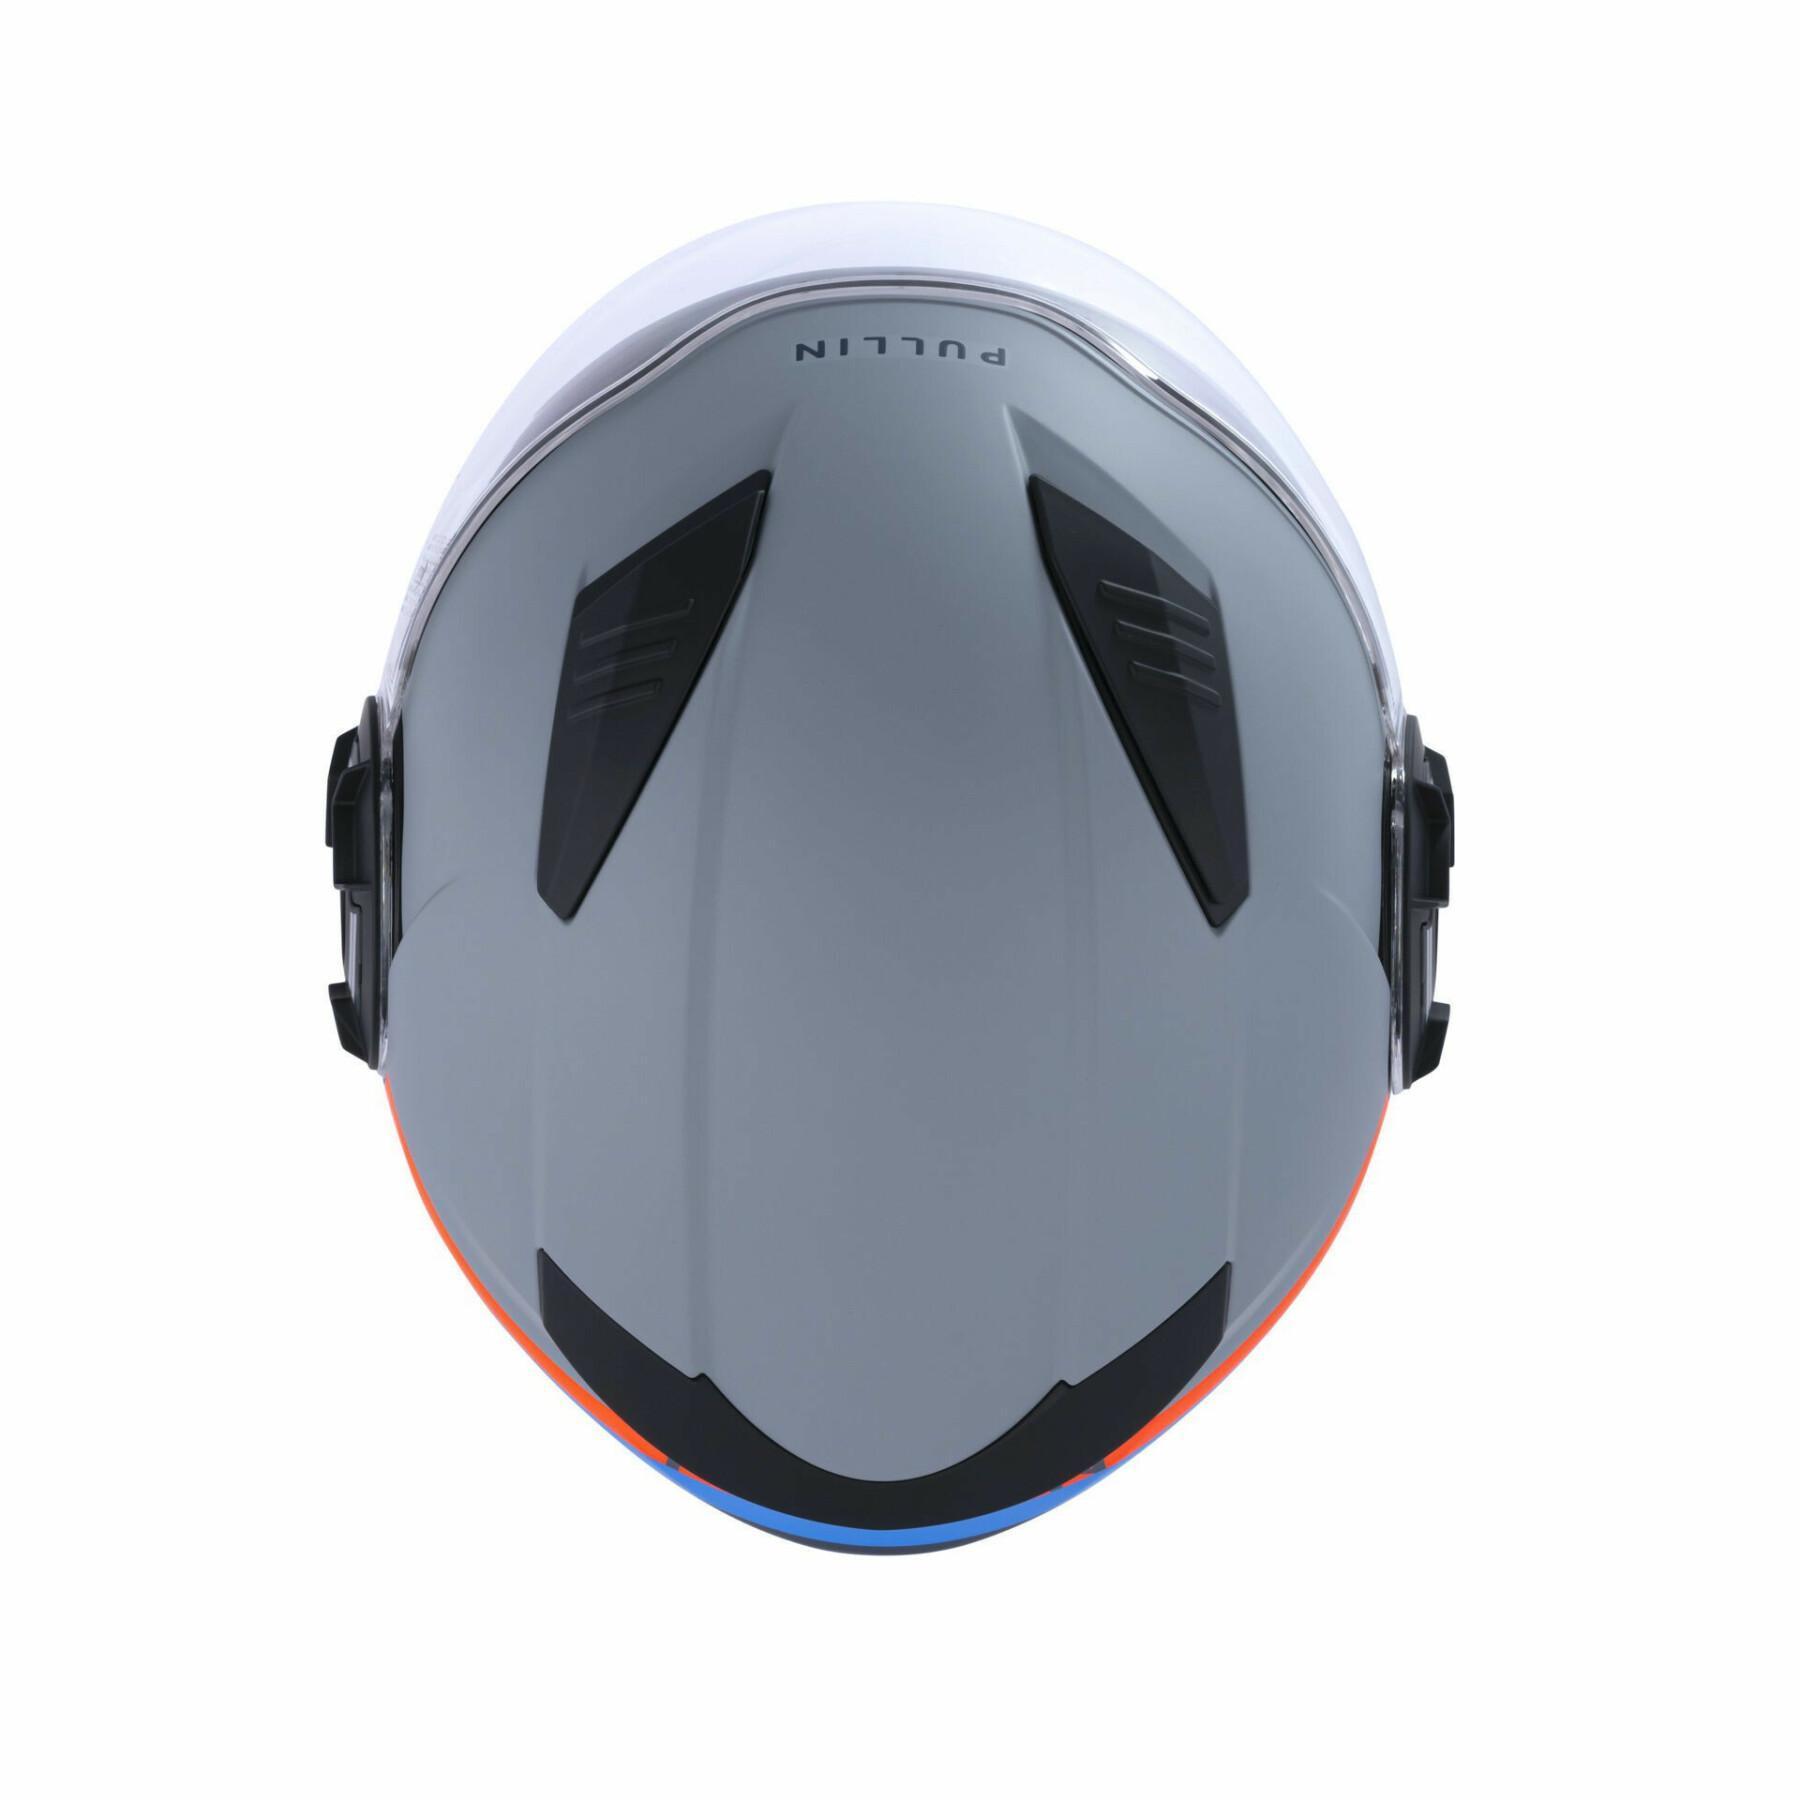 Casque moto jet Pull-in open face